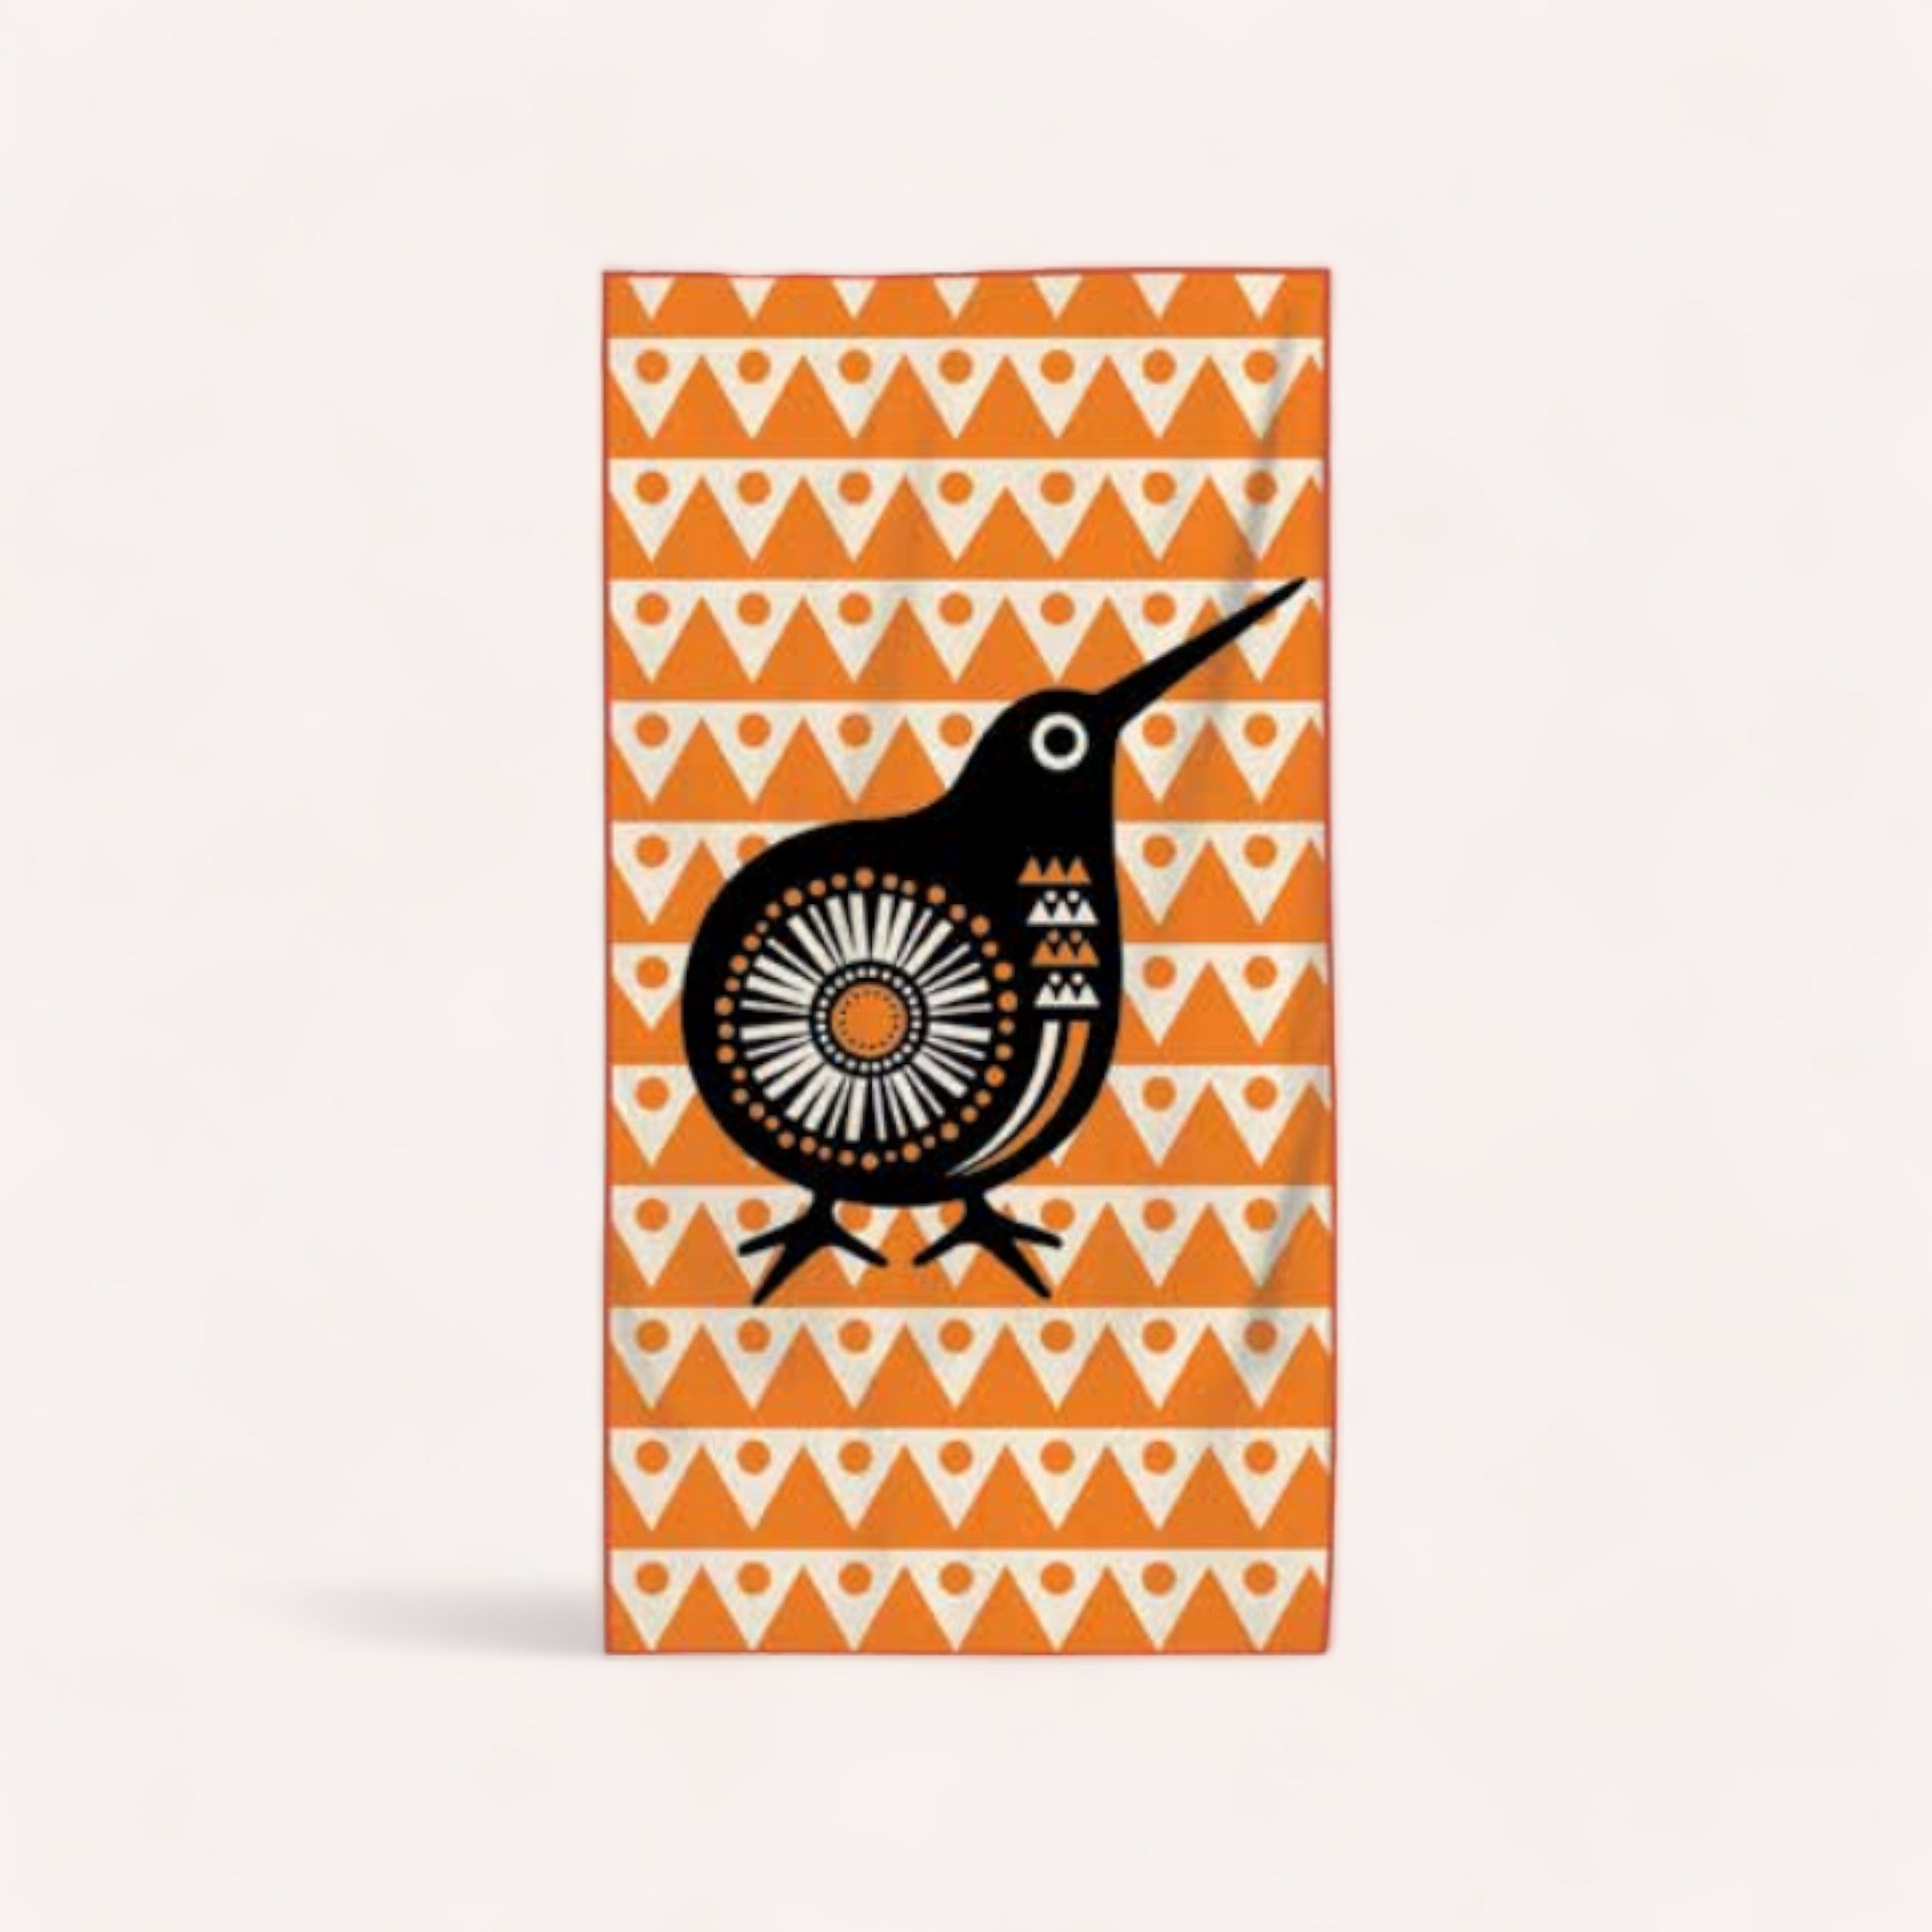 Abstract tribal bird illustration on a patterned orange background, ultra absorbent microfibre Compact Kiwi Beach Towel by Design by Leonard.